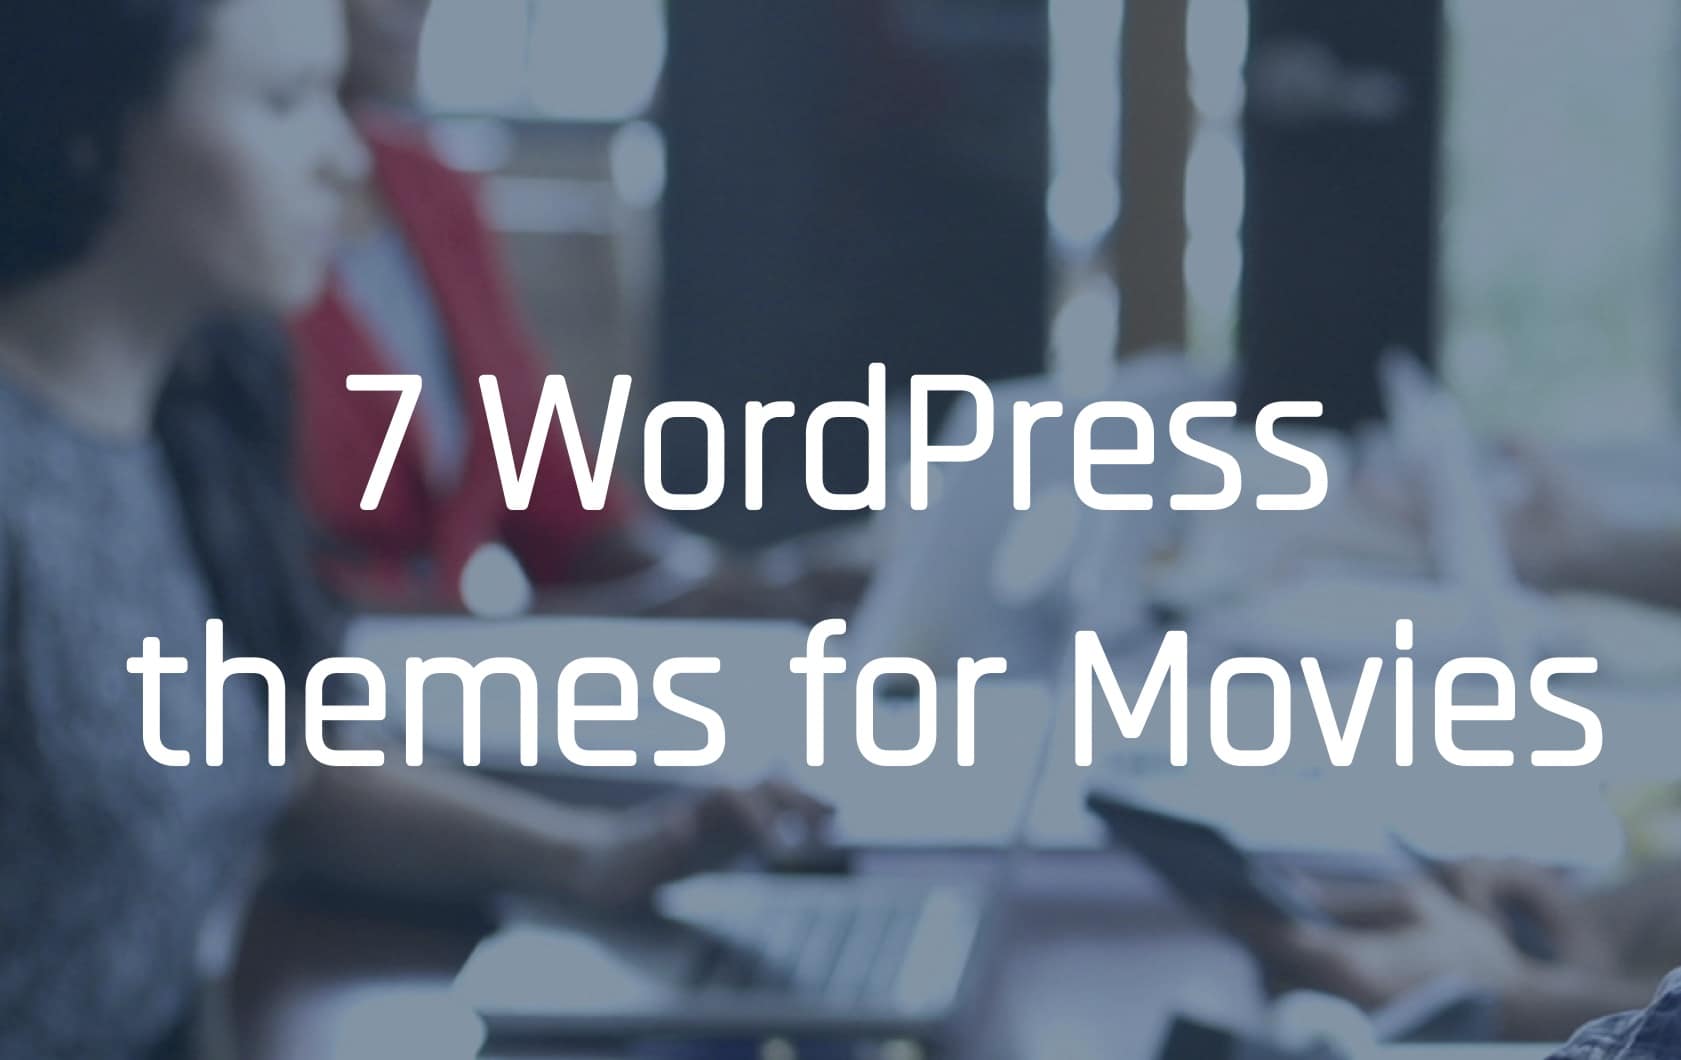 A person is listening to music while viewing a screenshot of seven WordPress themes for movies.